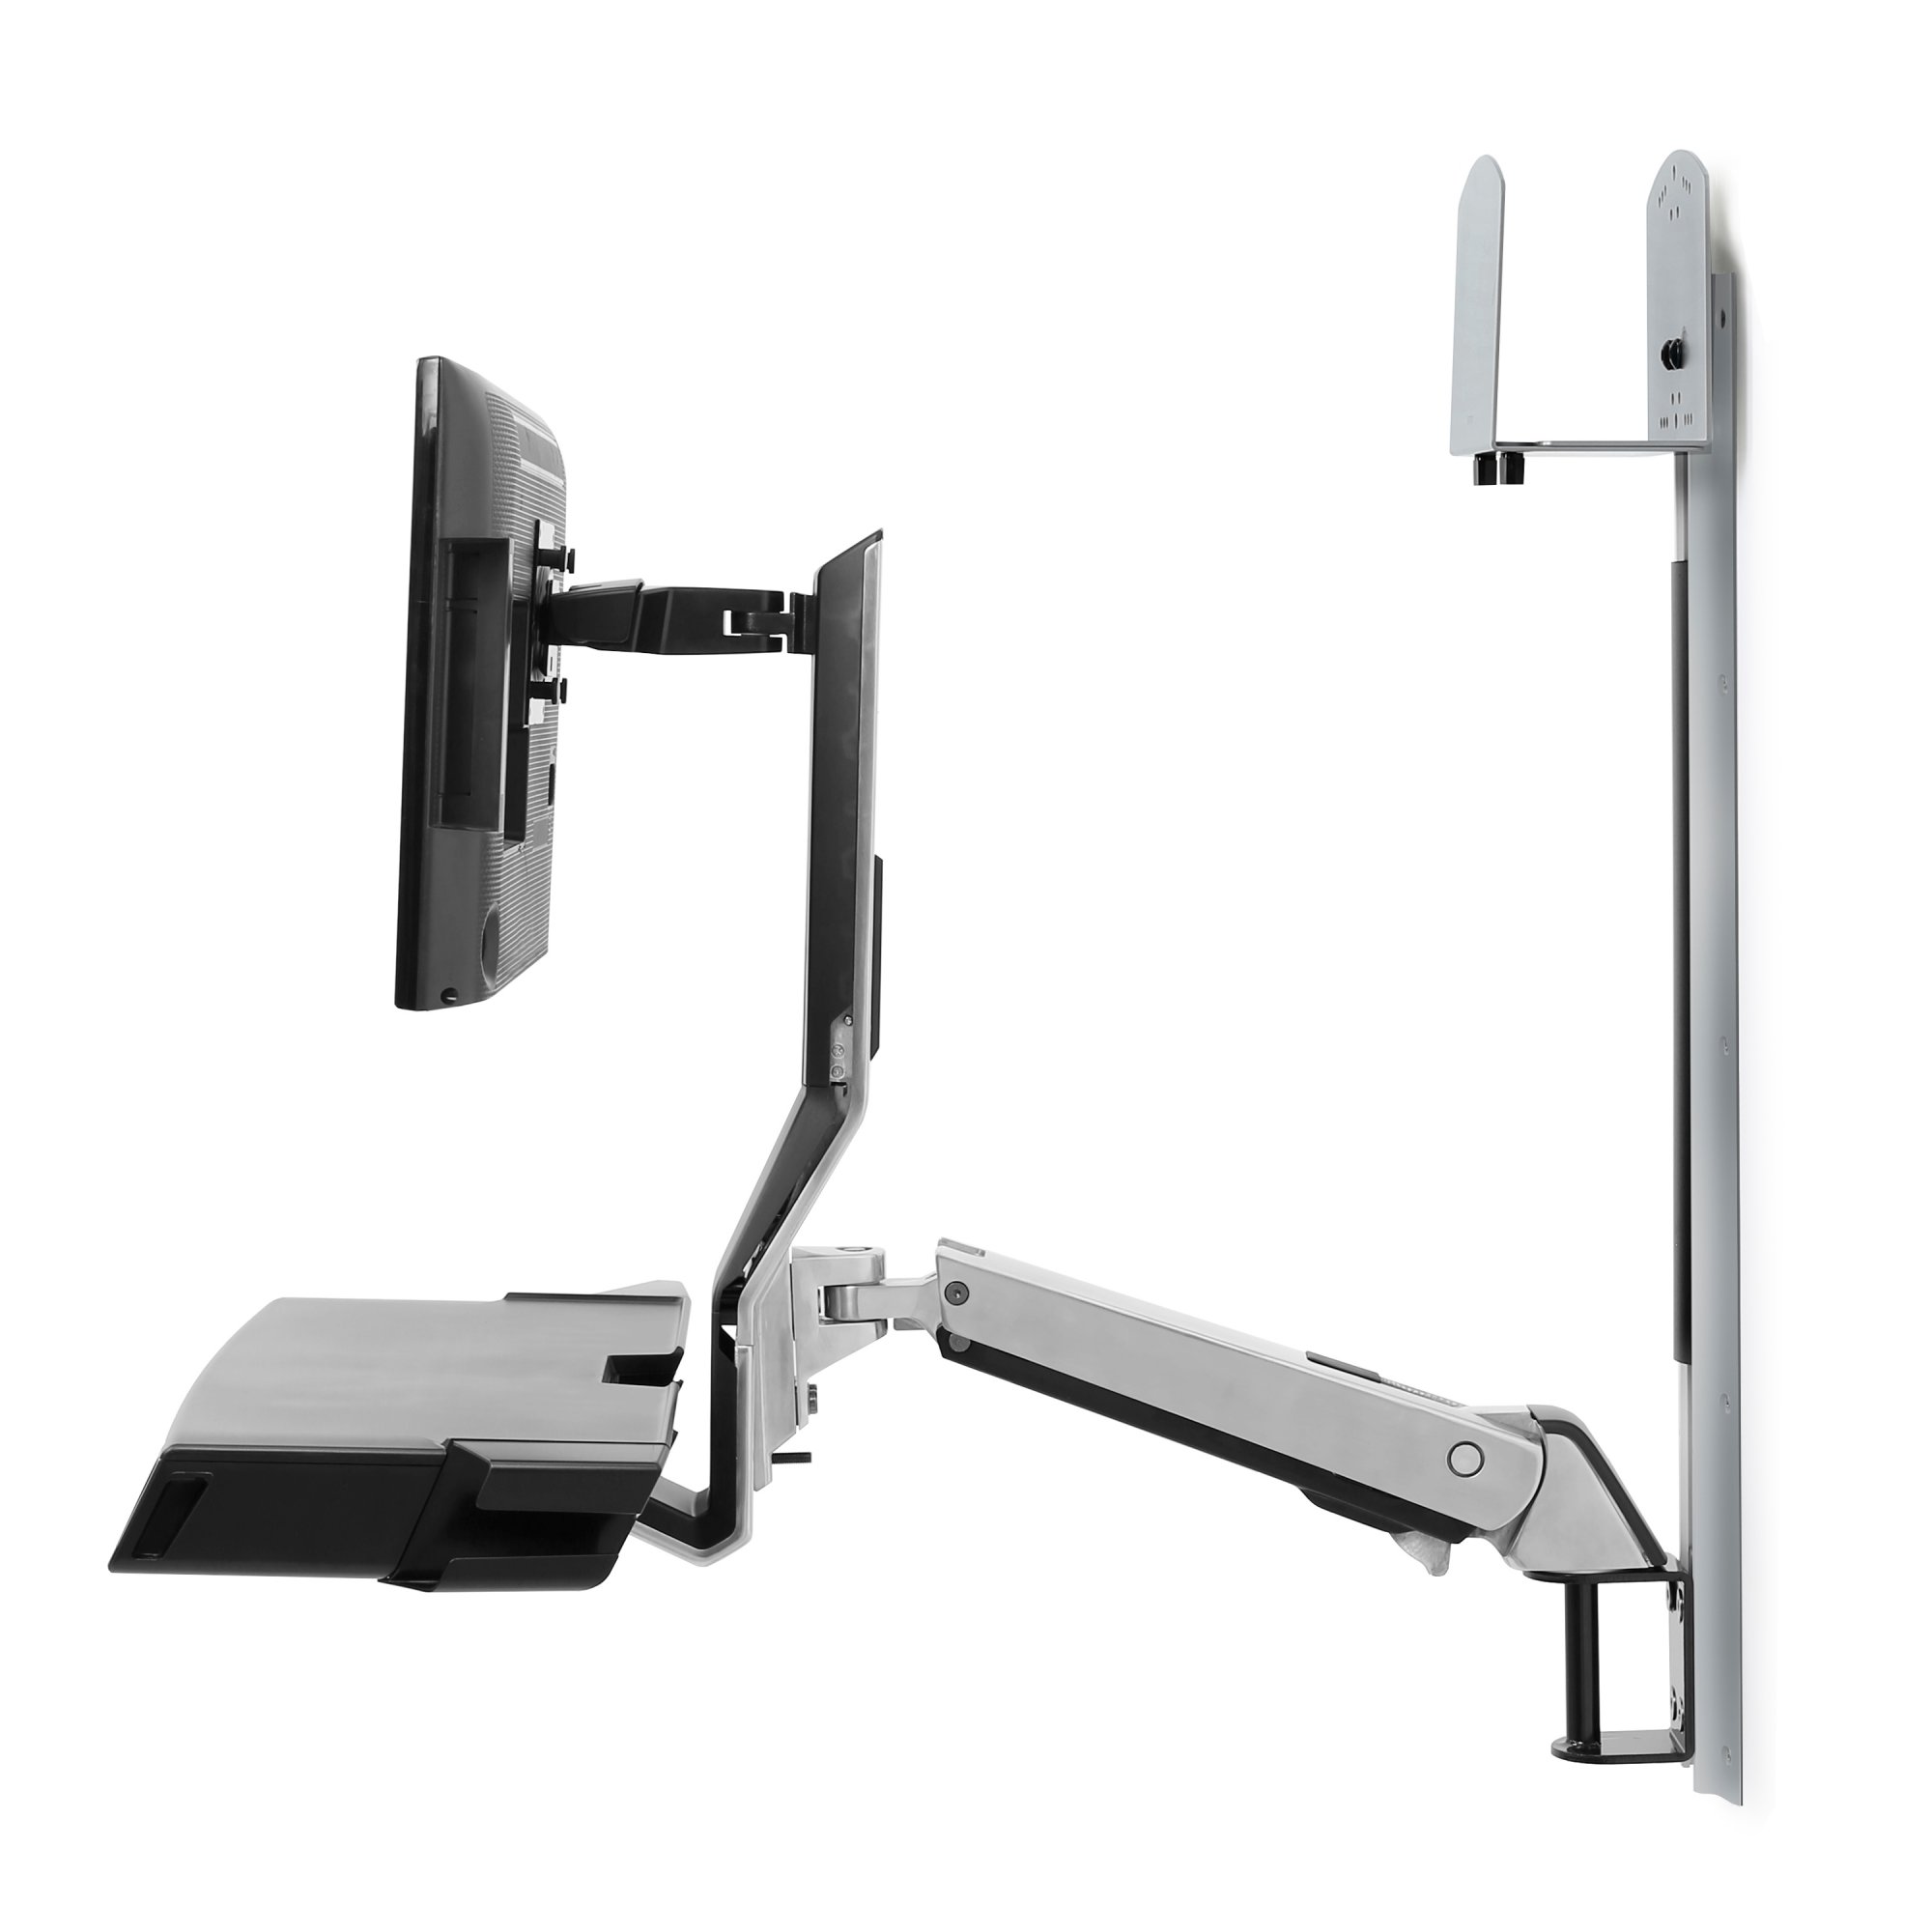 Patented CF technology provides premium 25" LCD height adjustment, portrait-to-landscape rotation and 30° tilt